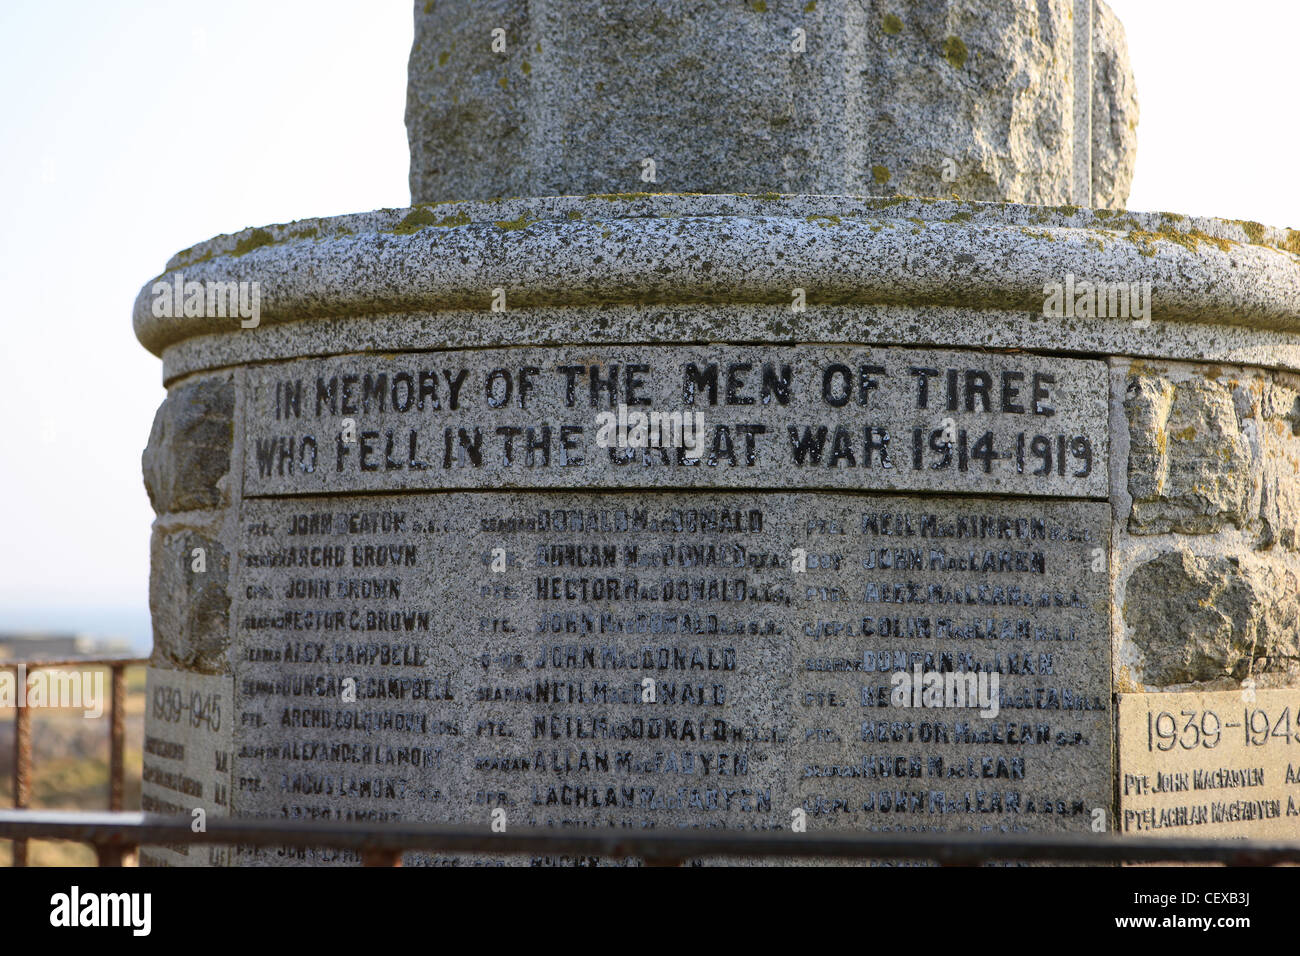 War memorial on the Isle of Tiree 'In memory of the men of Tiree who fell in the great war 1914-1919' Stock Photo